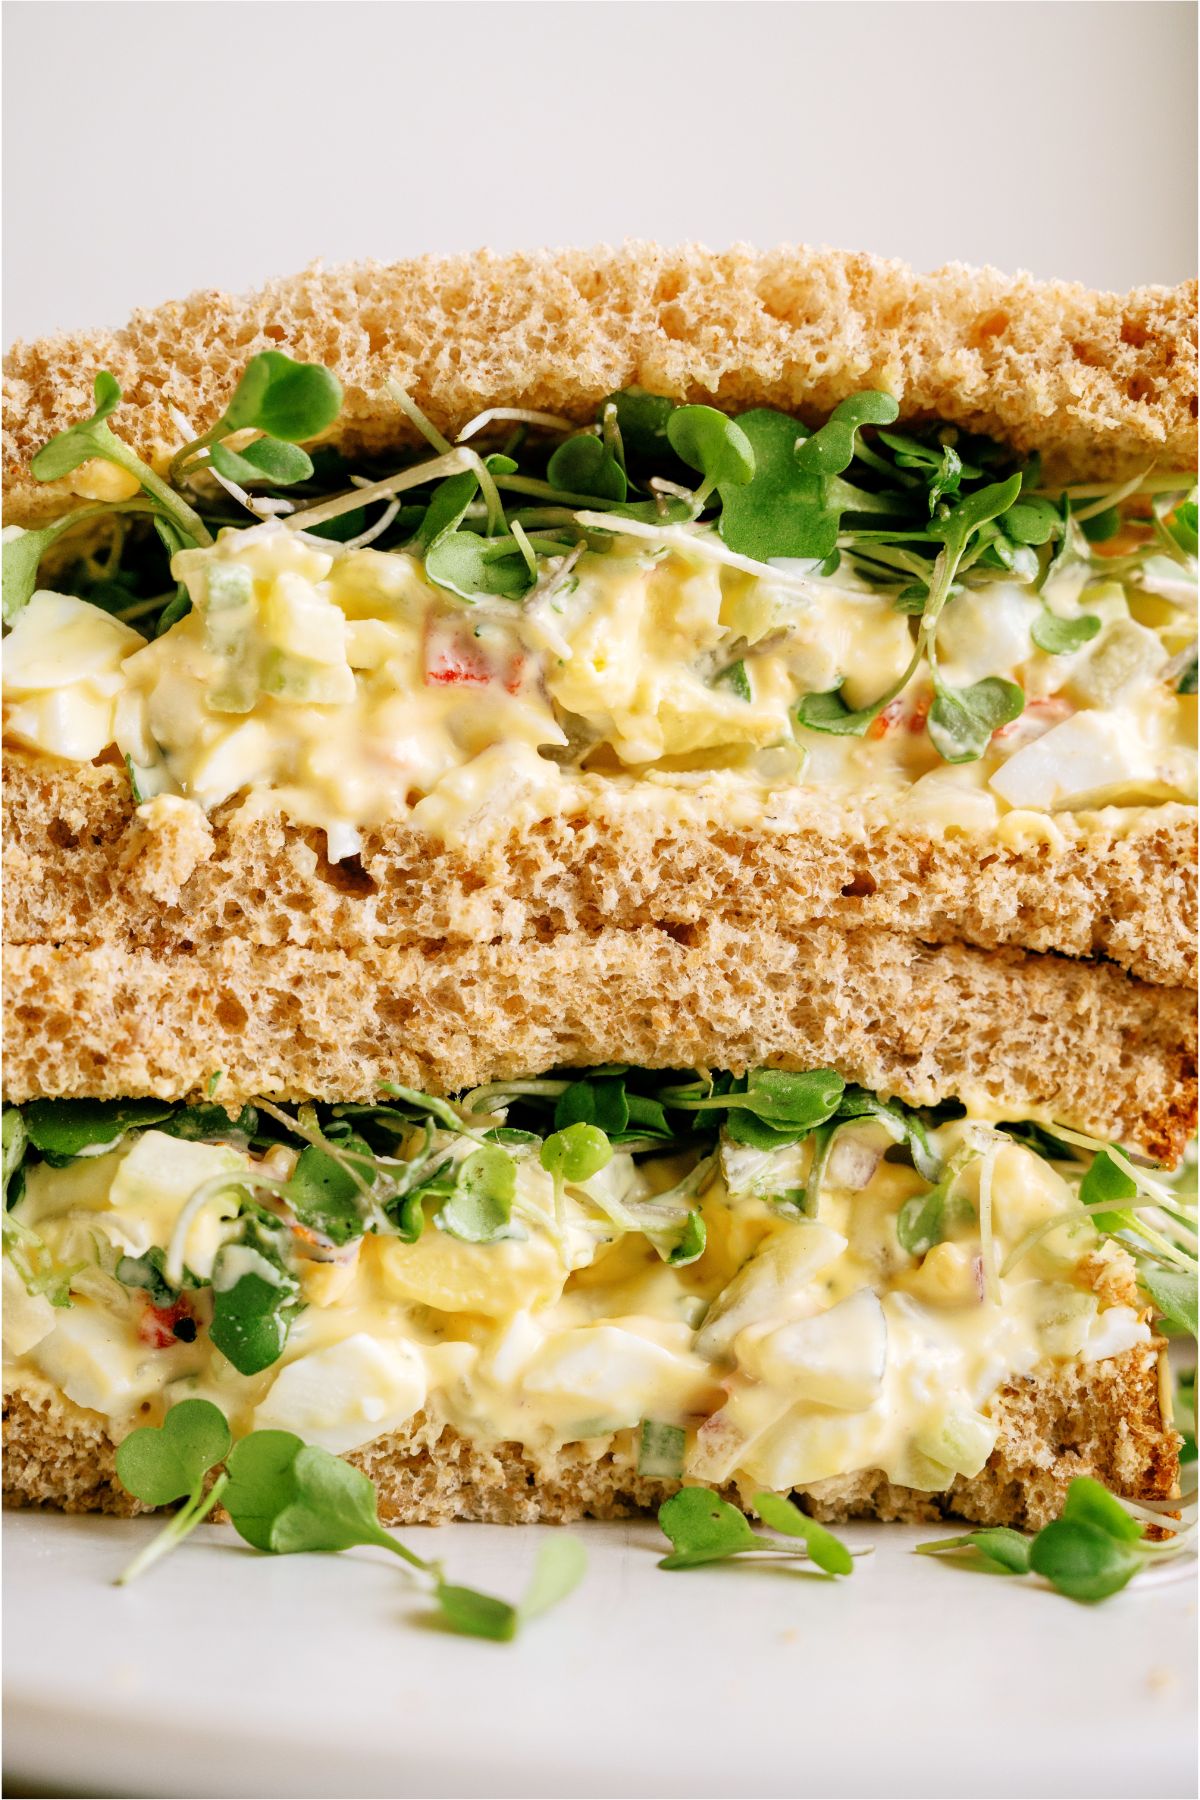 Stacked Loaded Egg Salad Sandwiches